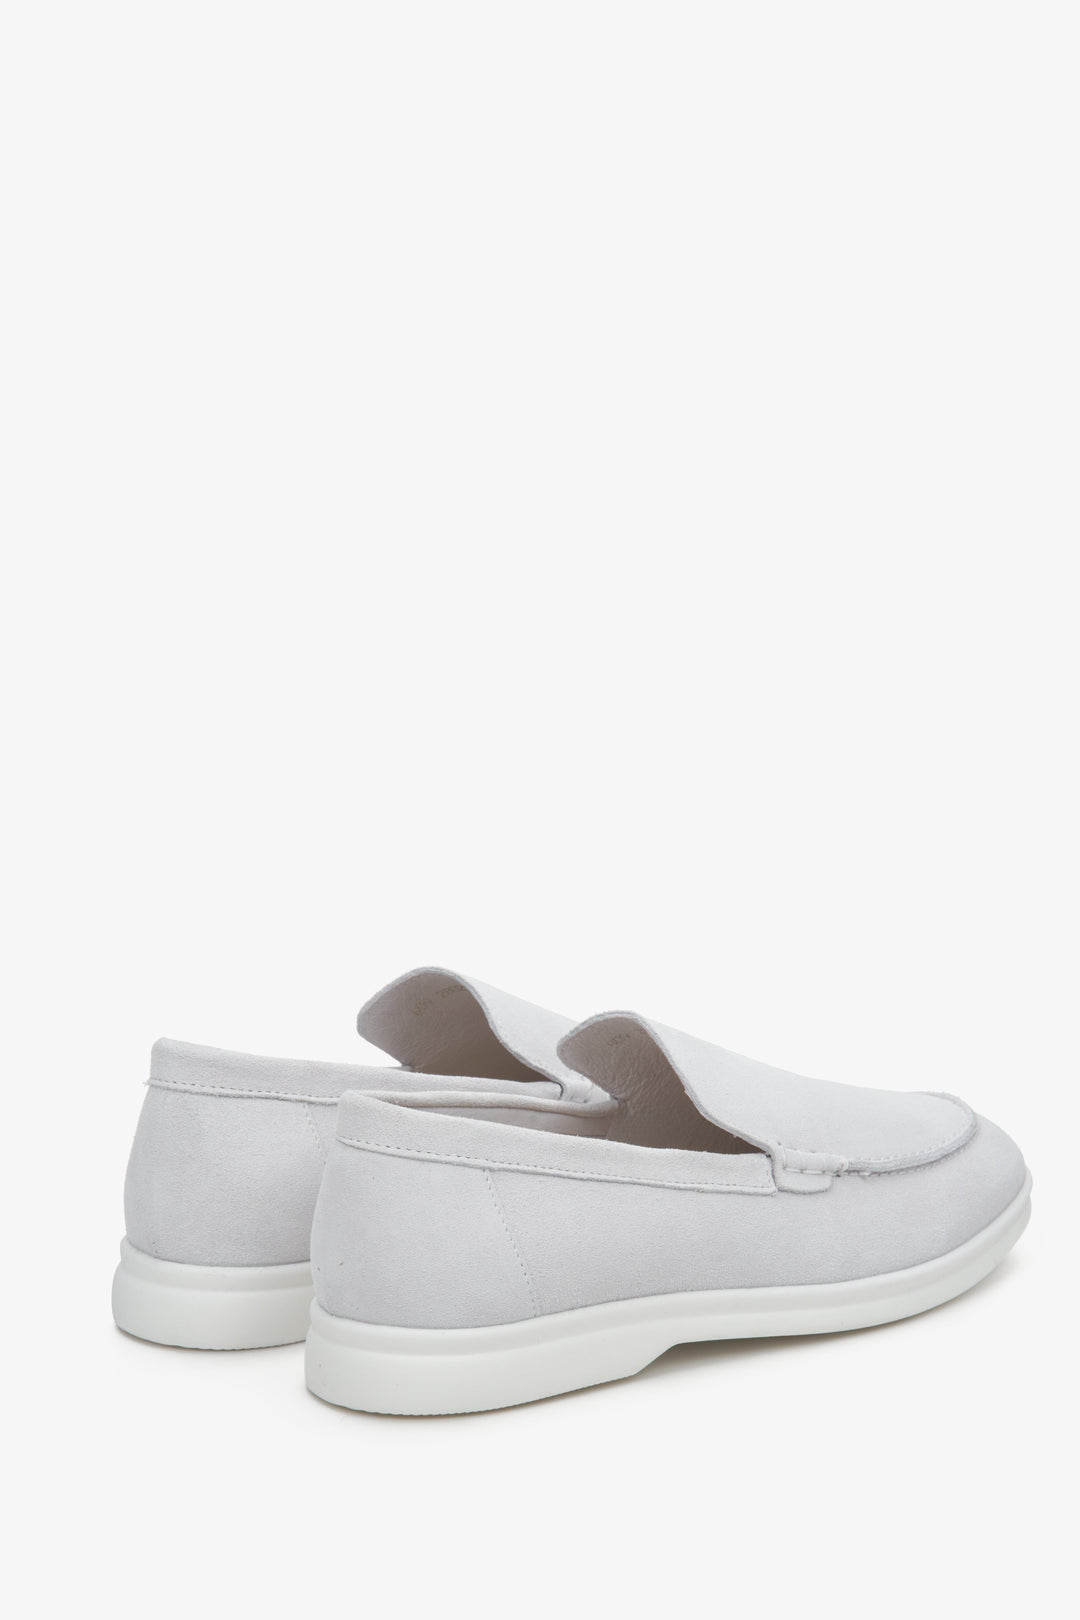 Women's suede moccasins in light grey Estro - close-up of the heel and side seam of the shoes.